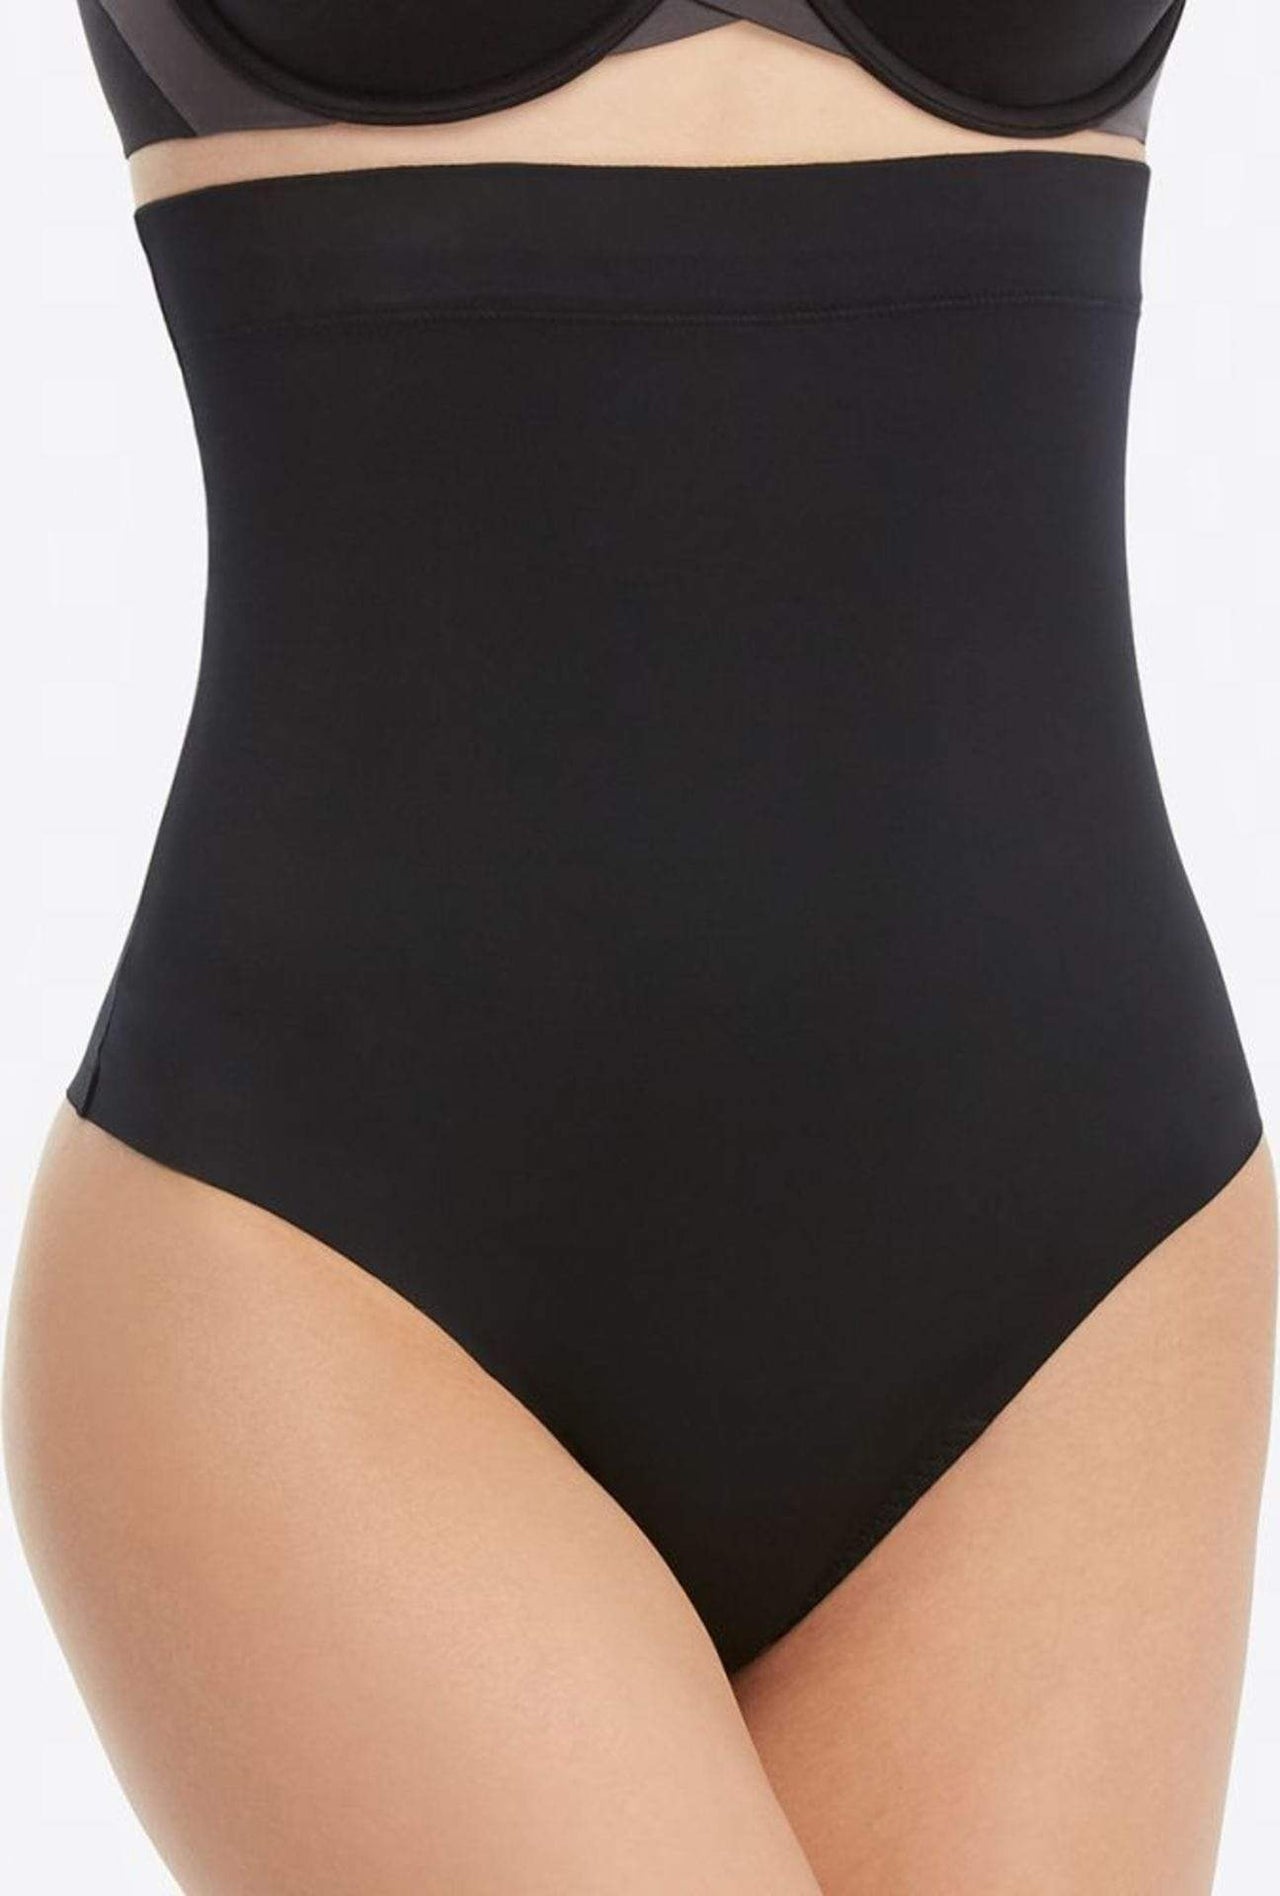 Suit Your Fancy High Waist Thong Very Black, Bra Lounge by Spanx | LIT Boutique